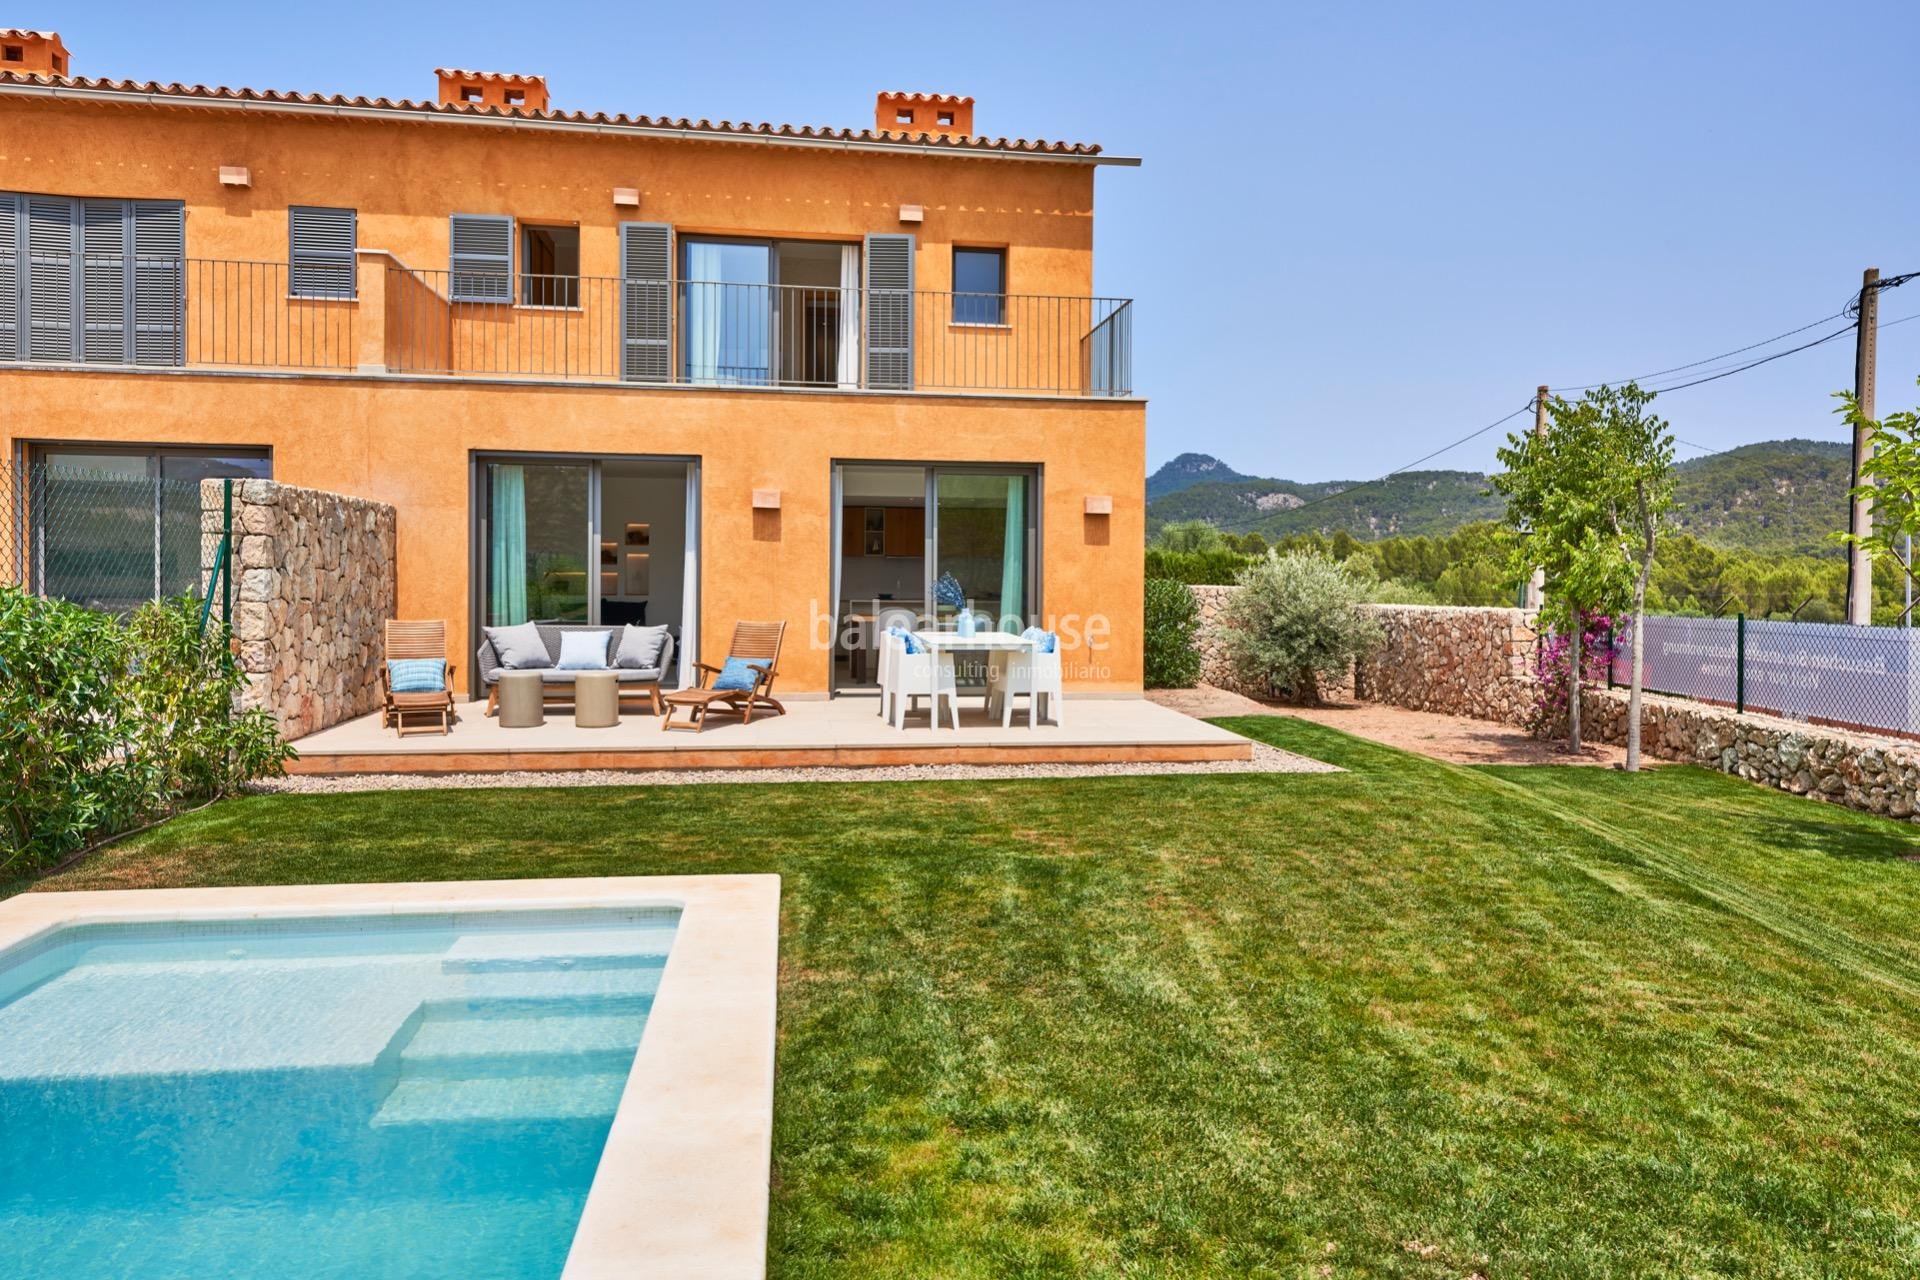 Beautiful newly built houses with private garden and swimming pool in a stunning natural landscape.